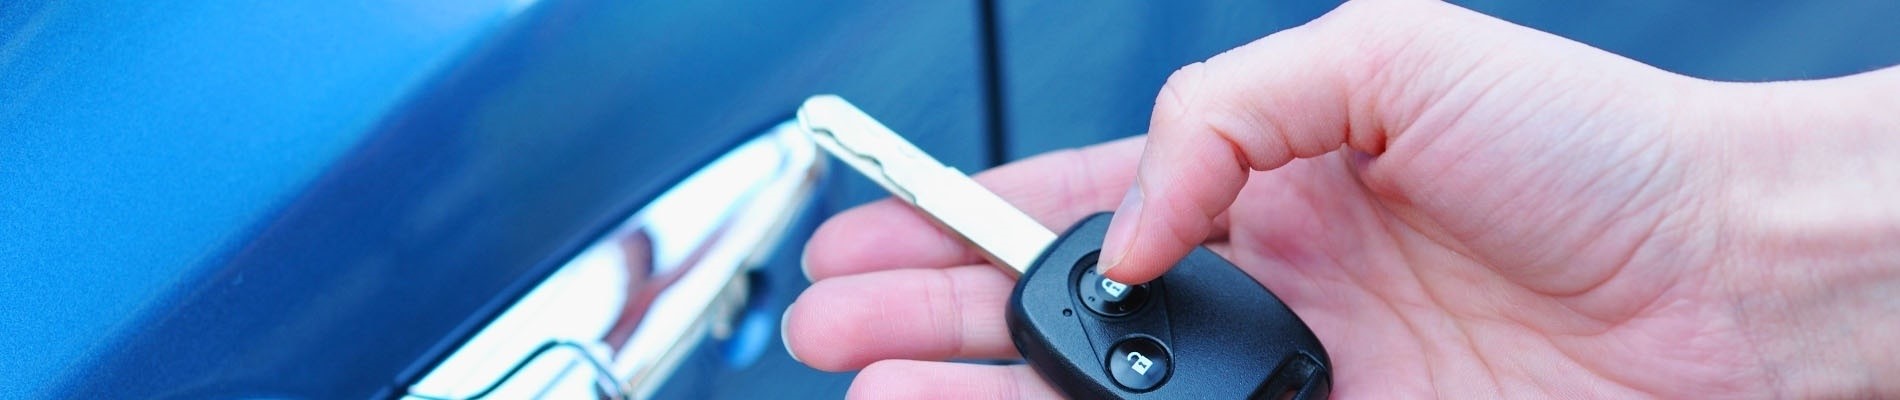 Winter Park FL, Get directions, Reviews and information for our Car Locksmith